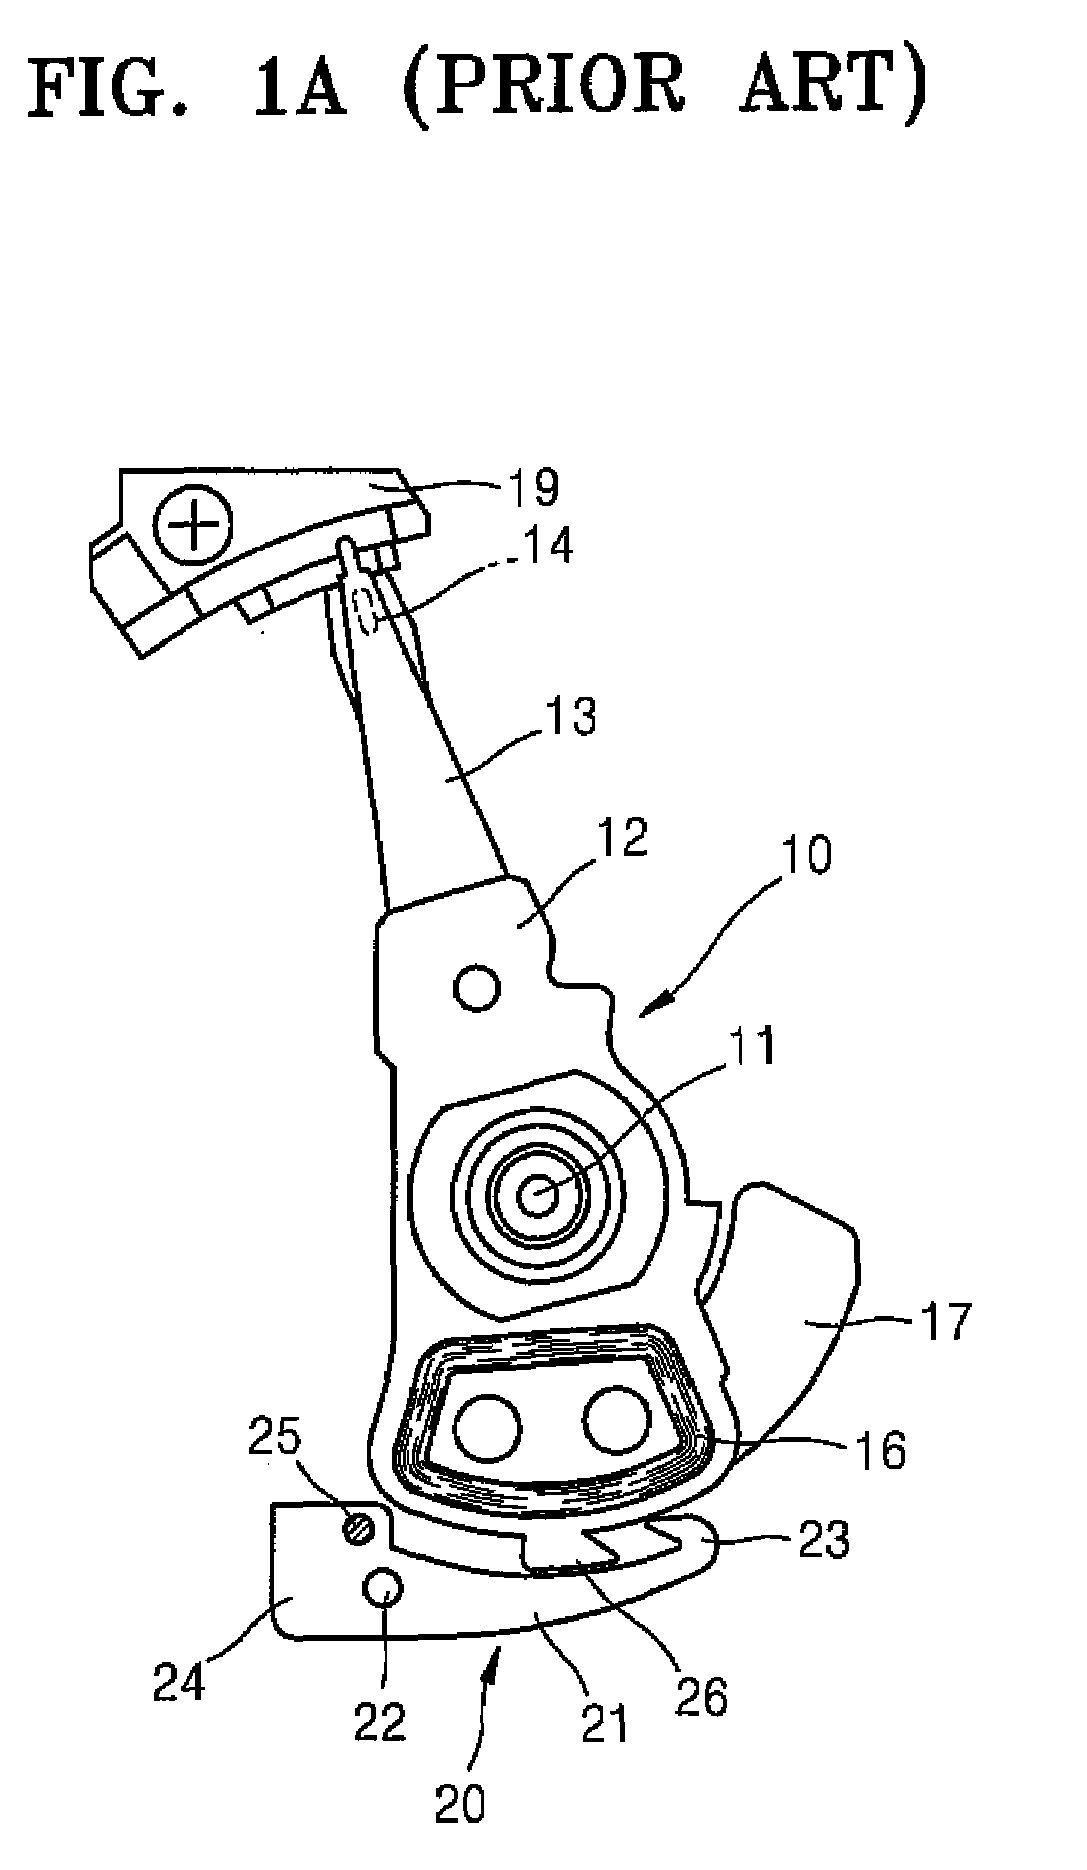 Actuator latch system of hard disk drive